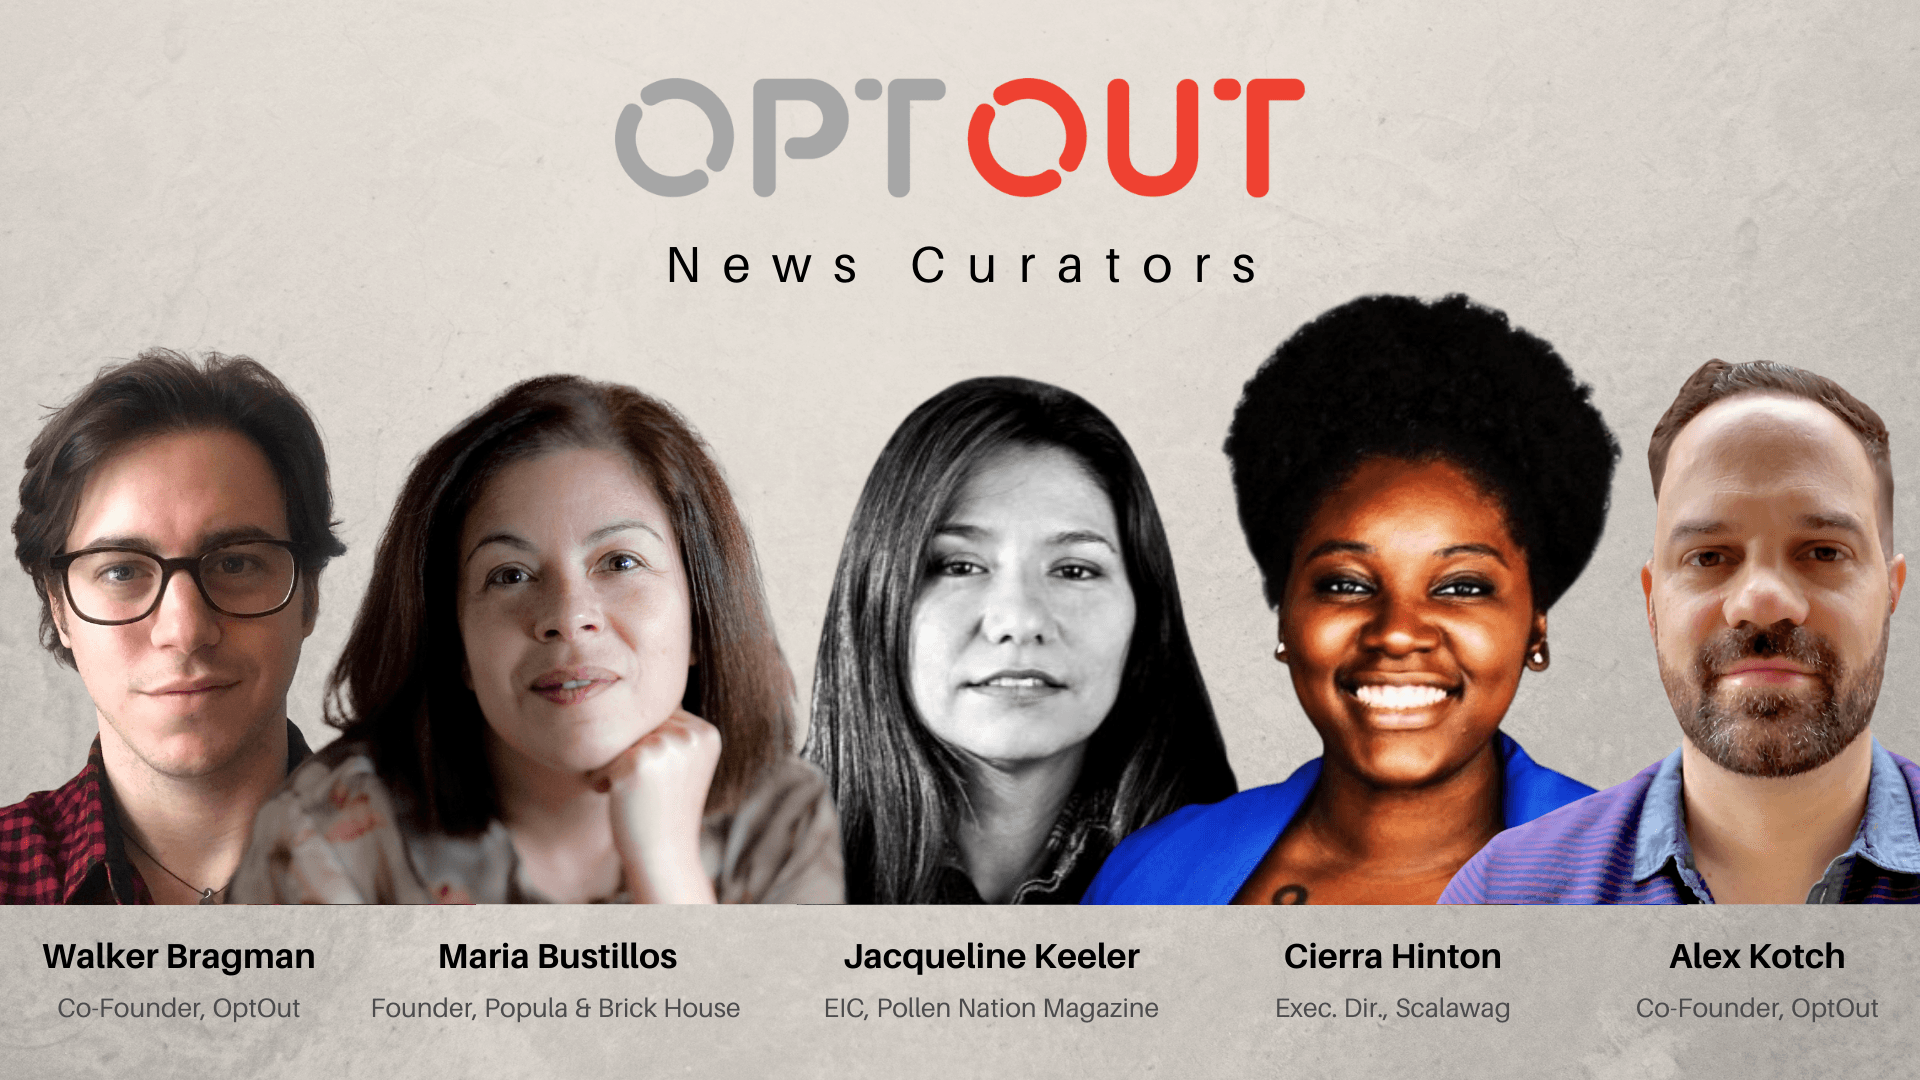 SPECIAL ANNOUNCEMENT: Meet OptOut's News Curators!